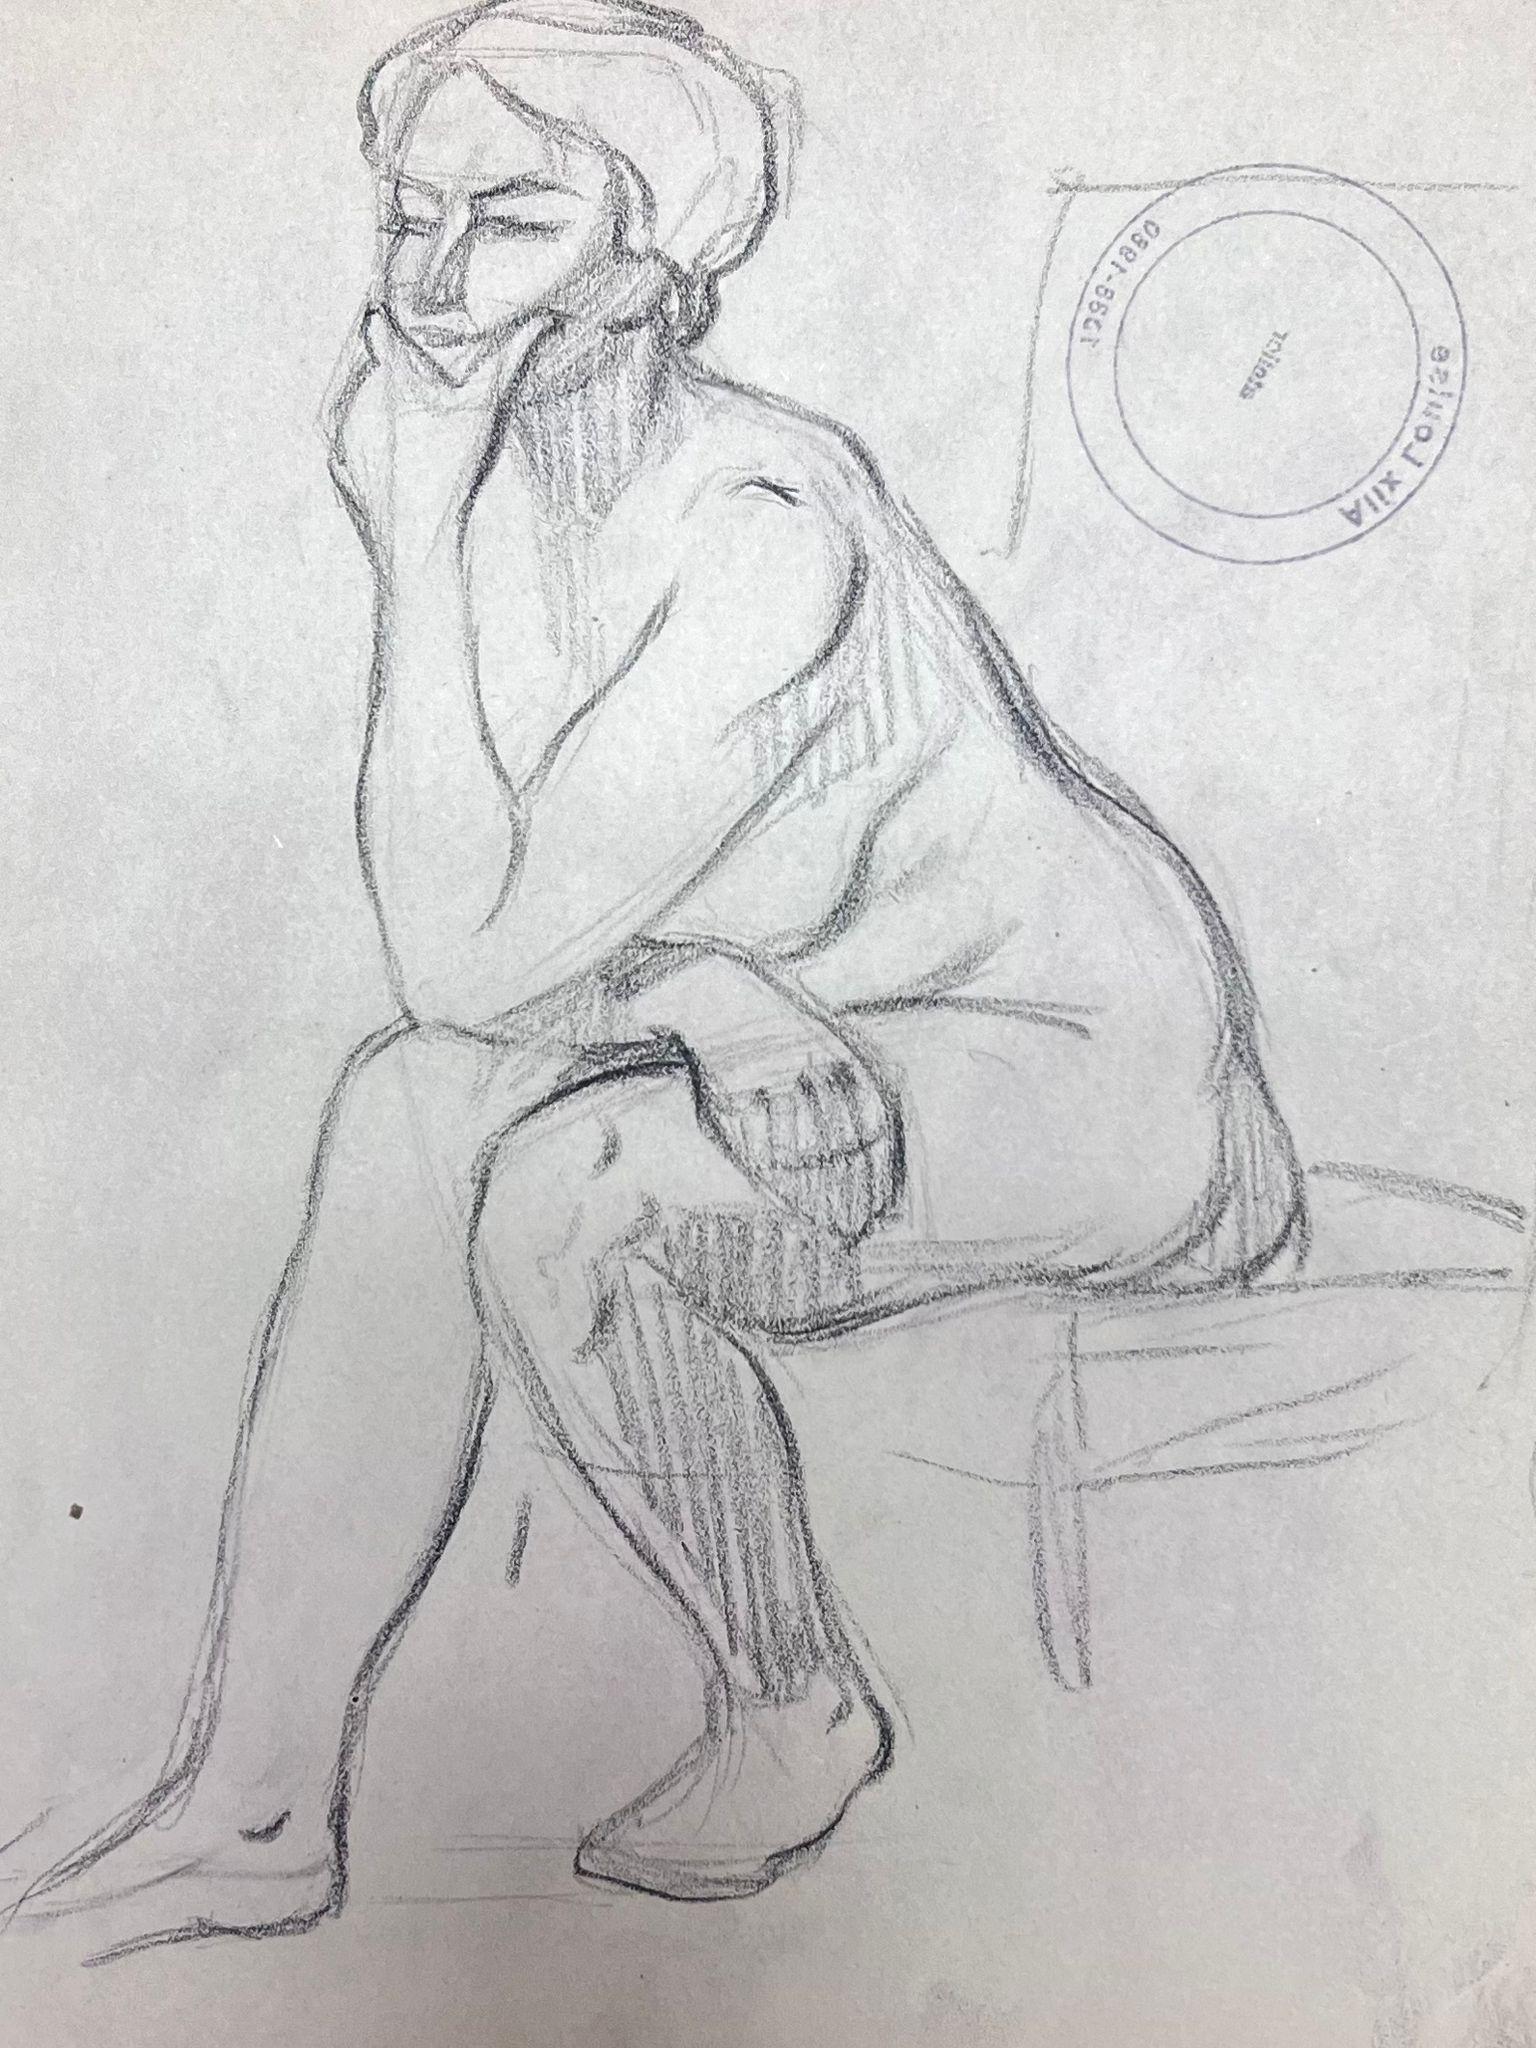 Nude Figure
by Louise Alix (French, 1888-1980) *see notes below
provenance stamp to the back 
pencil drawing on artist paper, unframed
measures: 10 high by 8 inches wide
condition: overall very good and sound, a few scuffs and marks to the surface